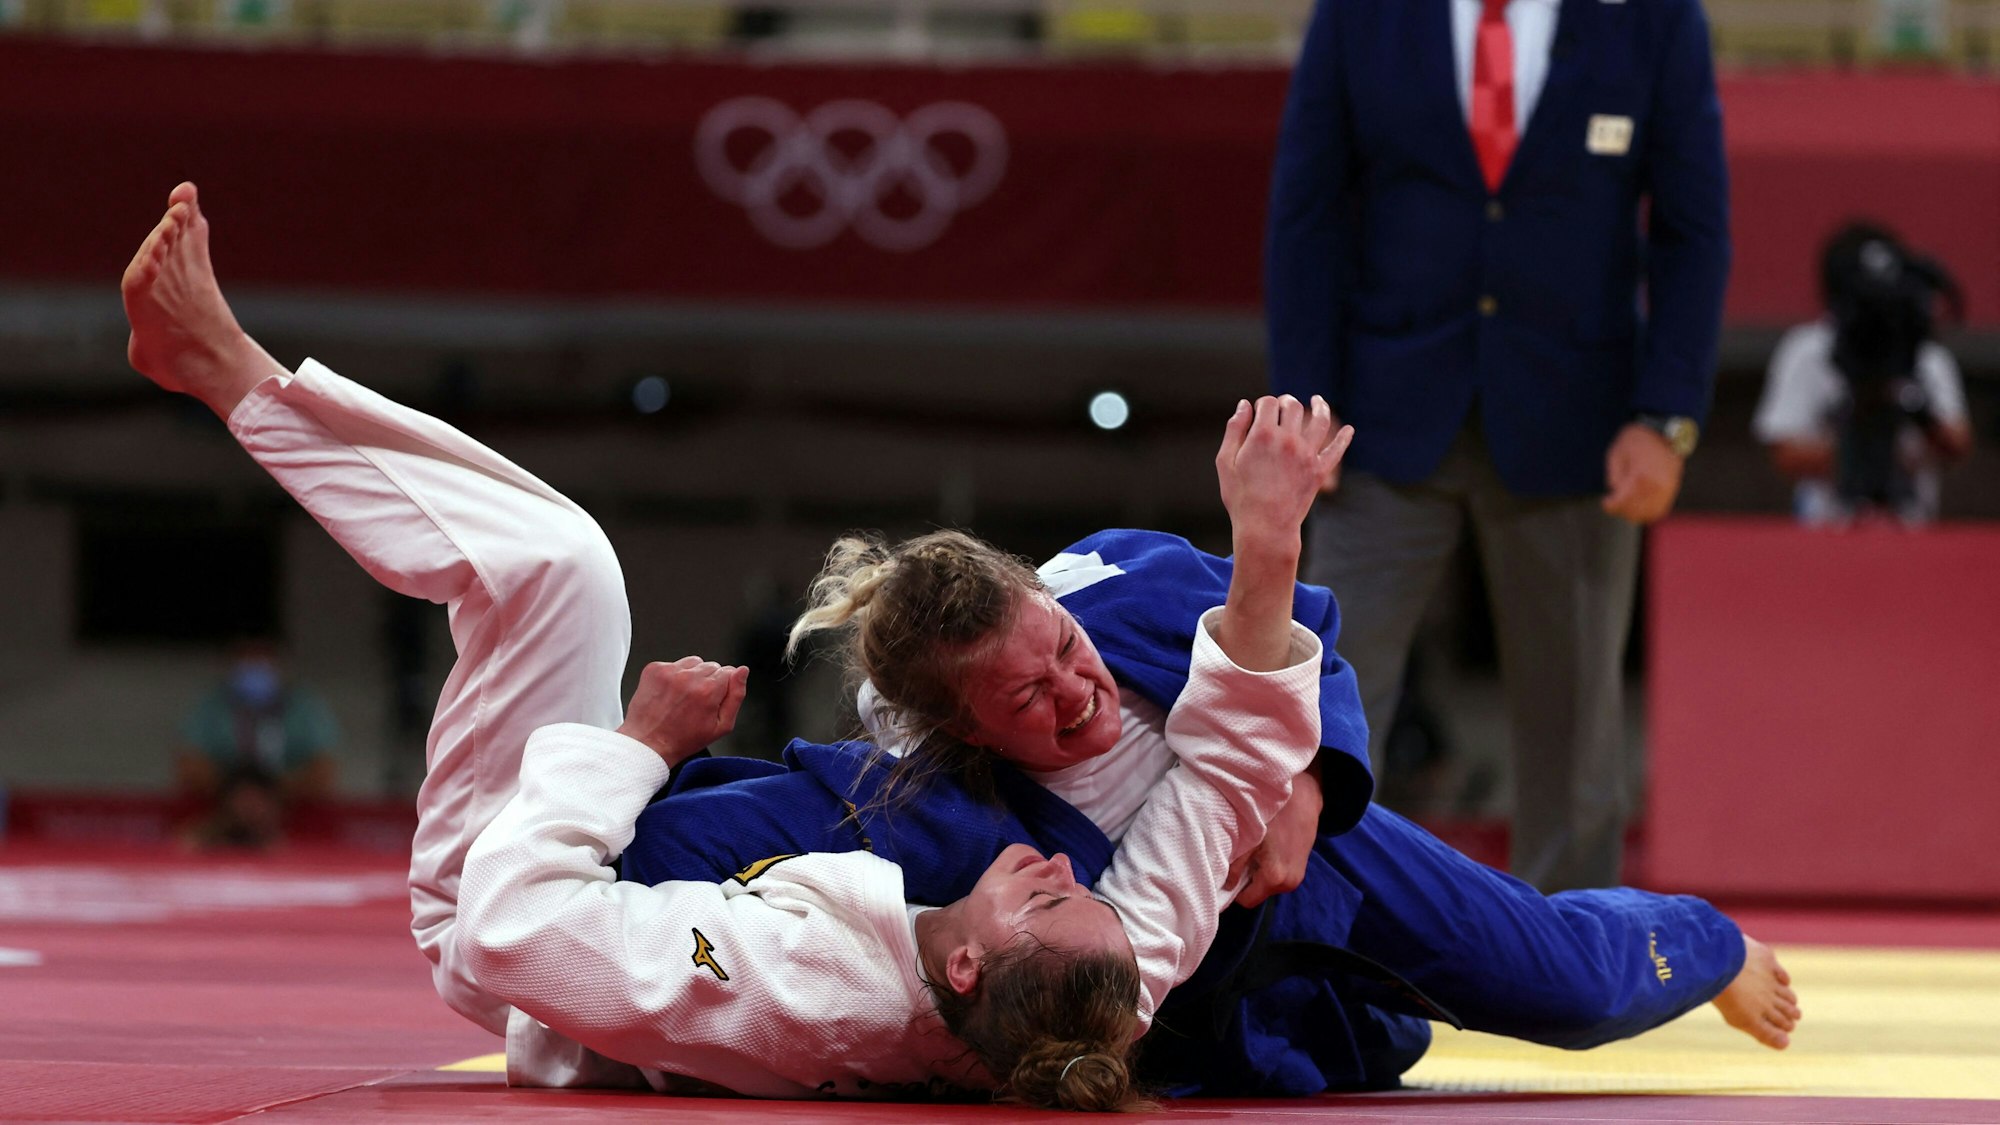 Germany's Giovanna Scoccimarro (white) and Netherlands' Sanne Van Dijke compete in the judo women's -70kg bronze medal B bout during the Tokyo 2020 Olympic Games at the Nippon Budokan in Tokyo on July 28, 2021. (Photo by Jack GUEZ / AFP)